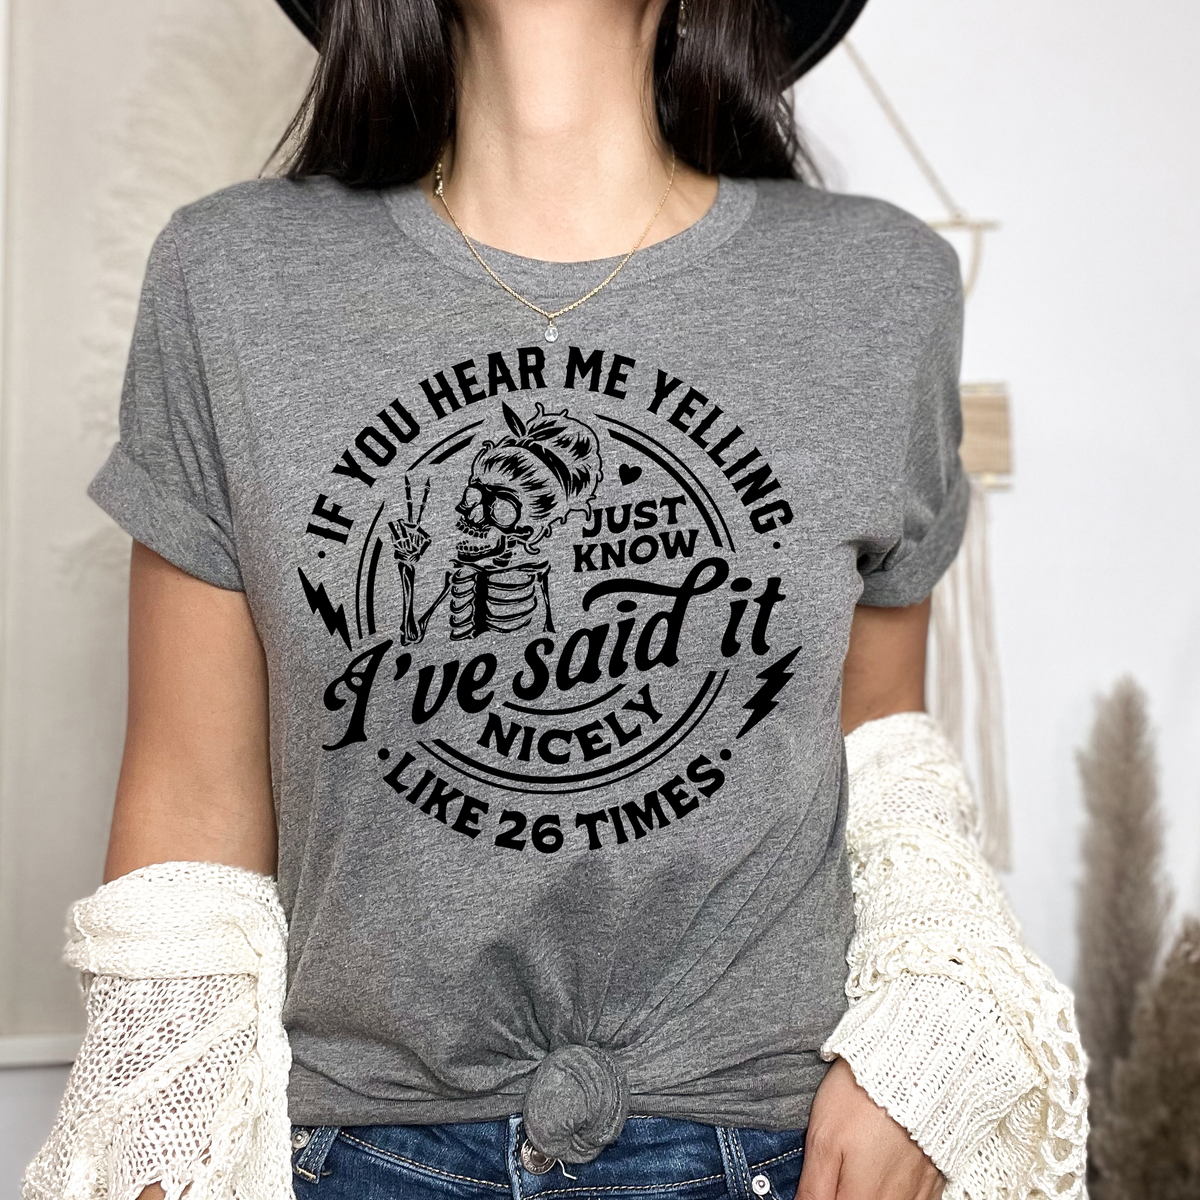 If You Hear Me Yelling Just Know I've Said it Nicely Like 26 Times T-Shirt